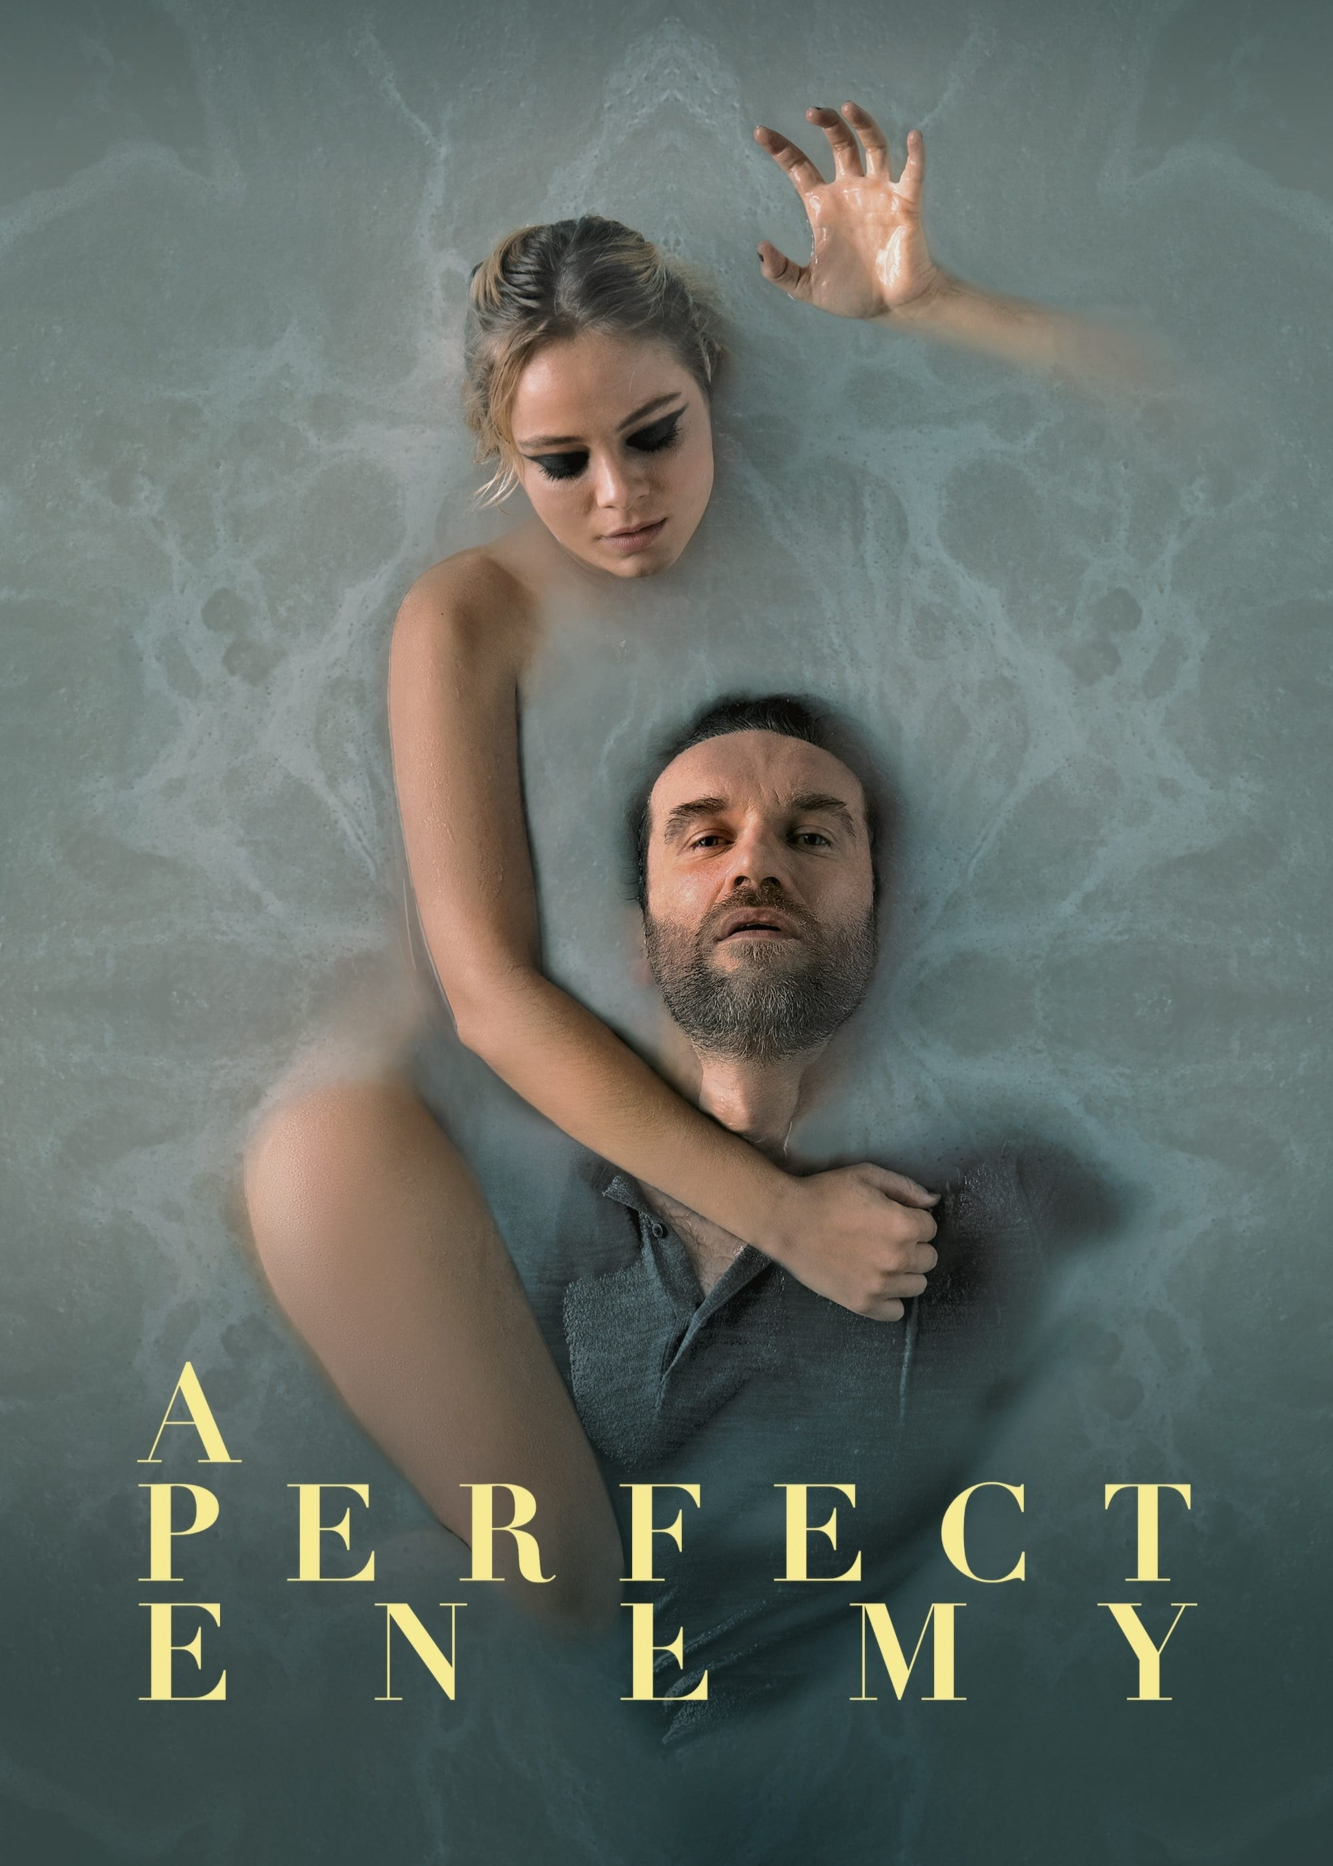 A Perfect Enemy (A Perfect Enemy) [2020]